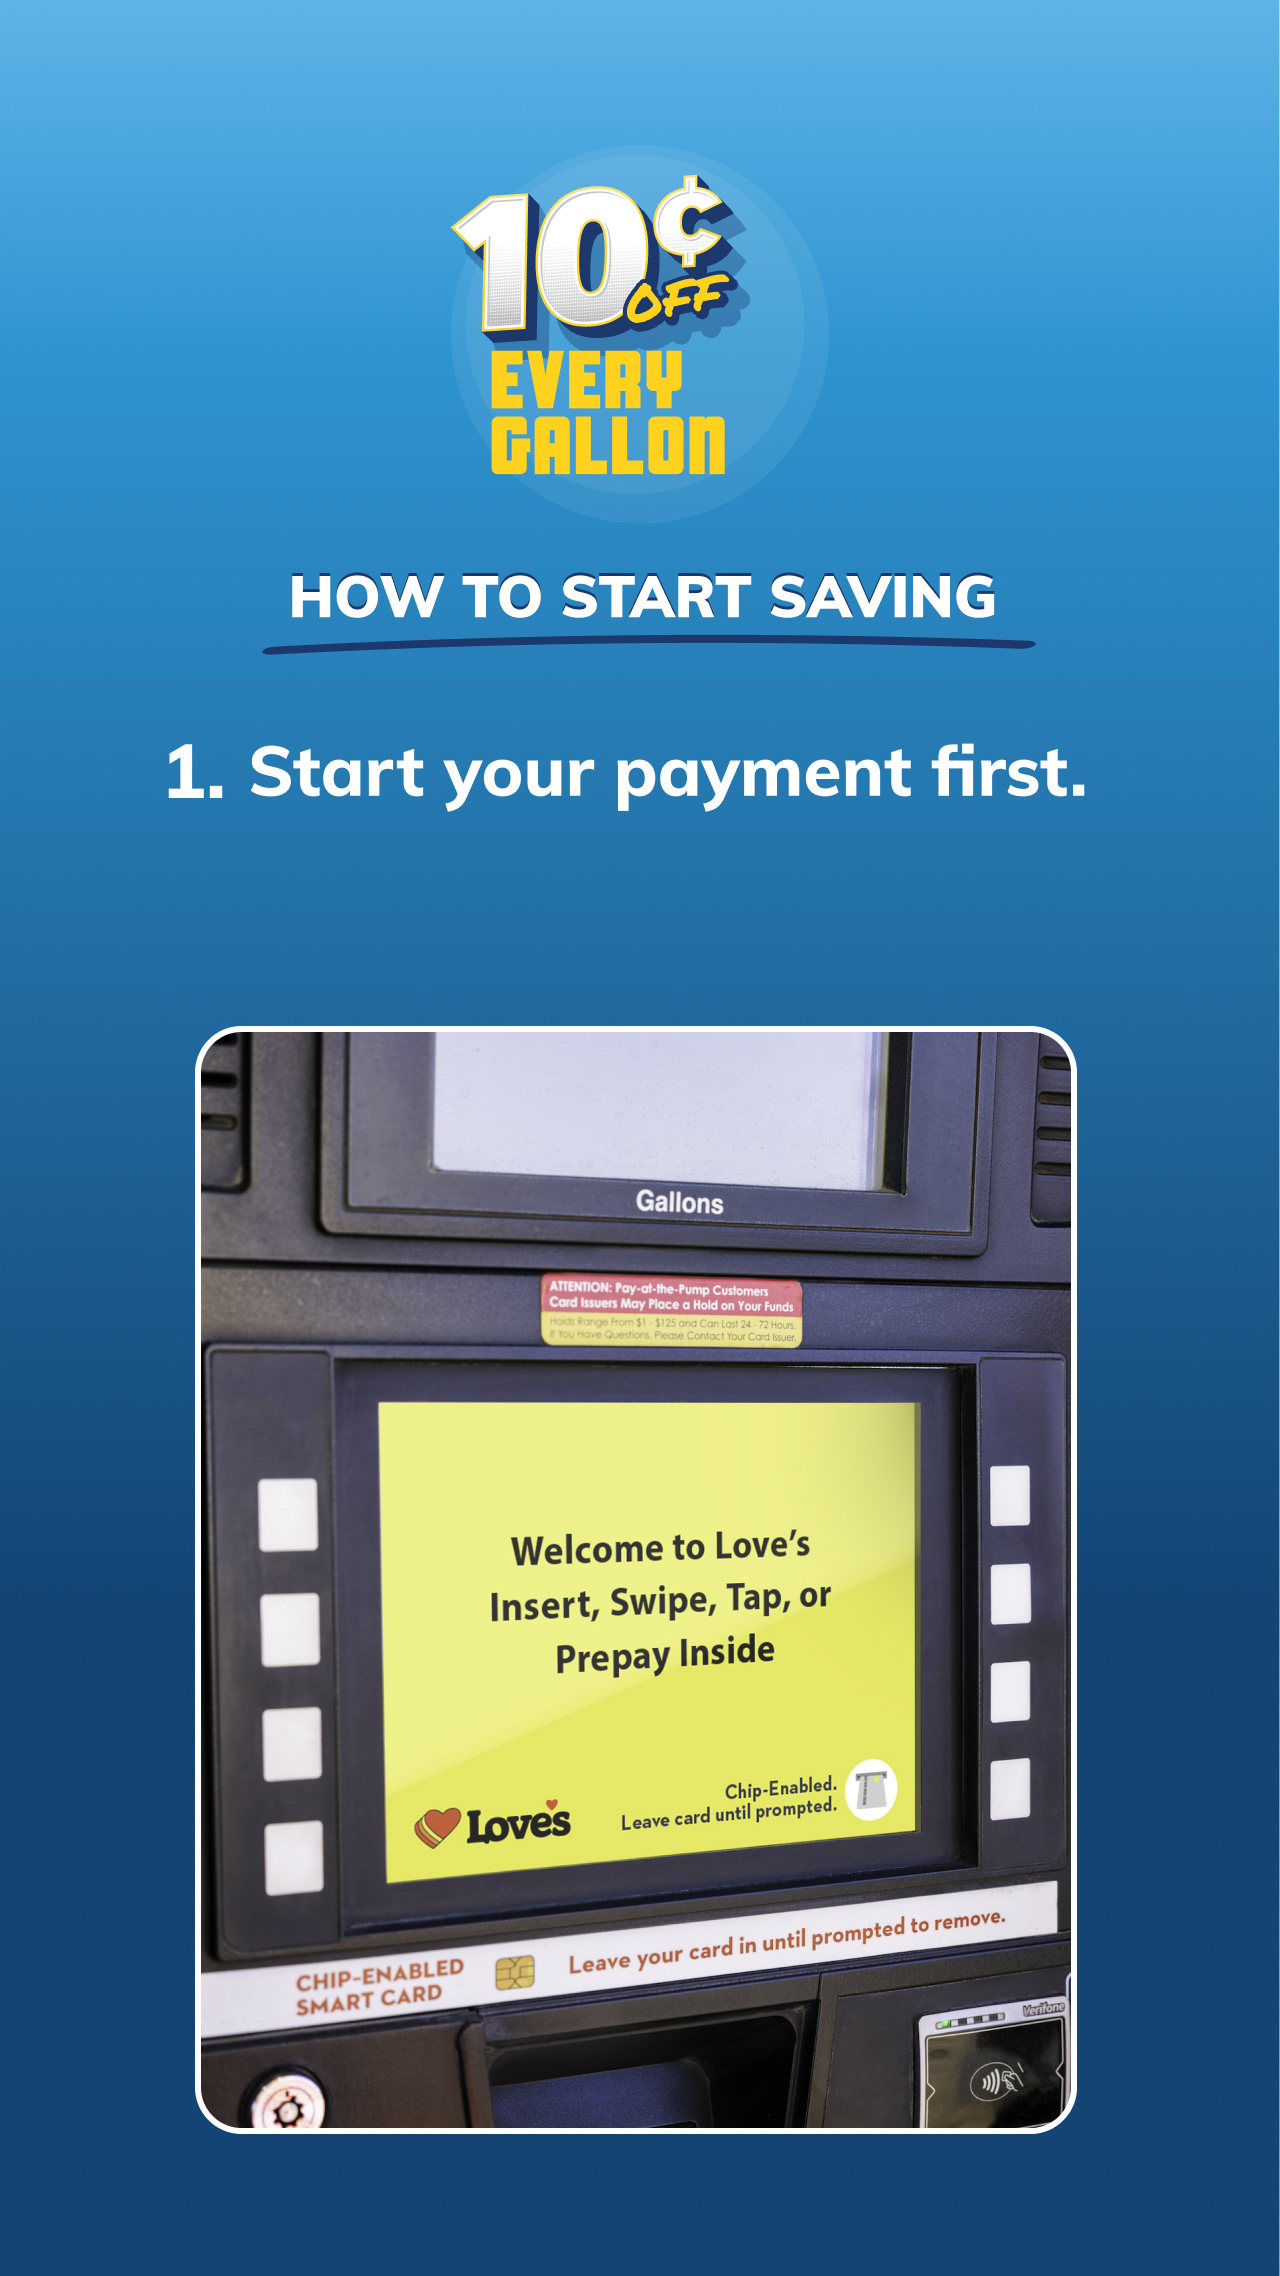 Step by step guide to saving 10¢ at the pump